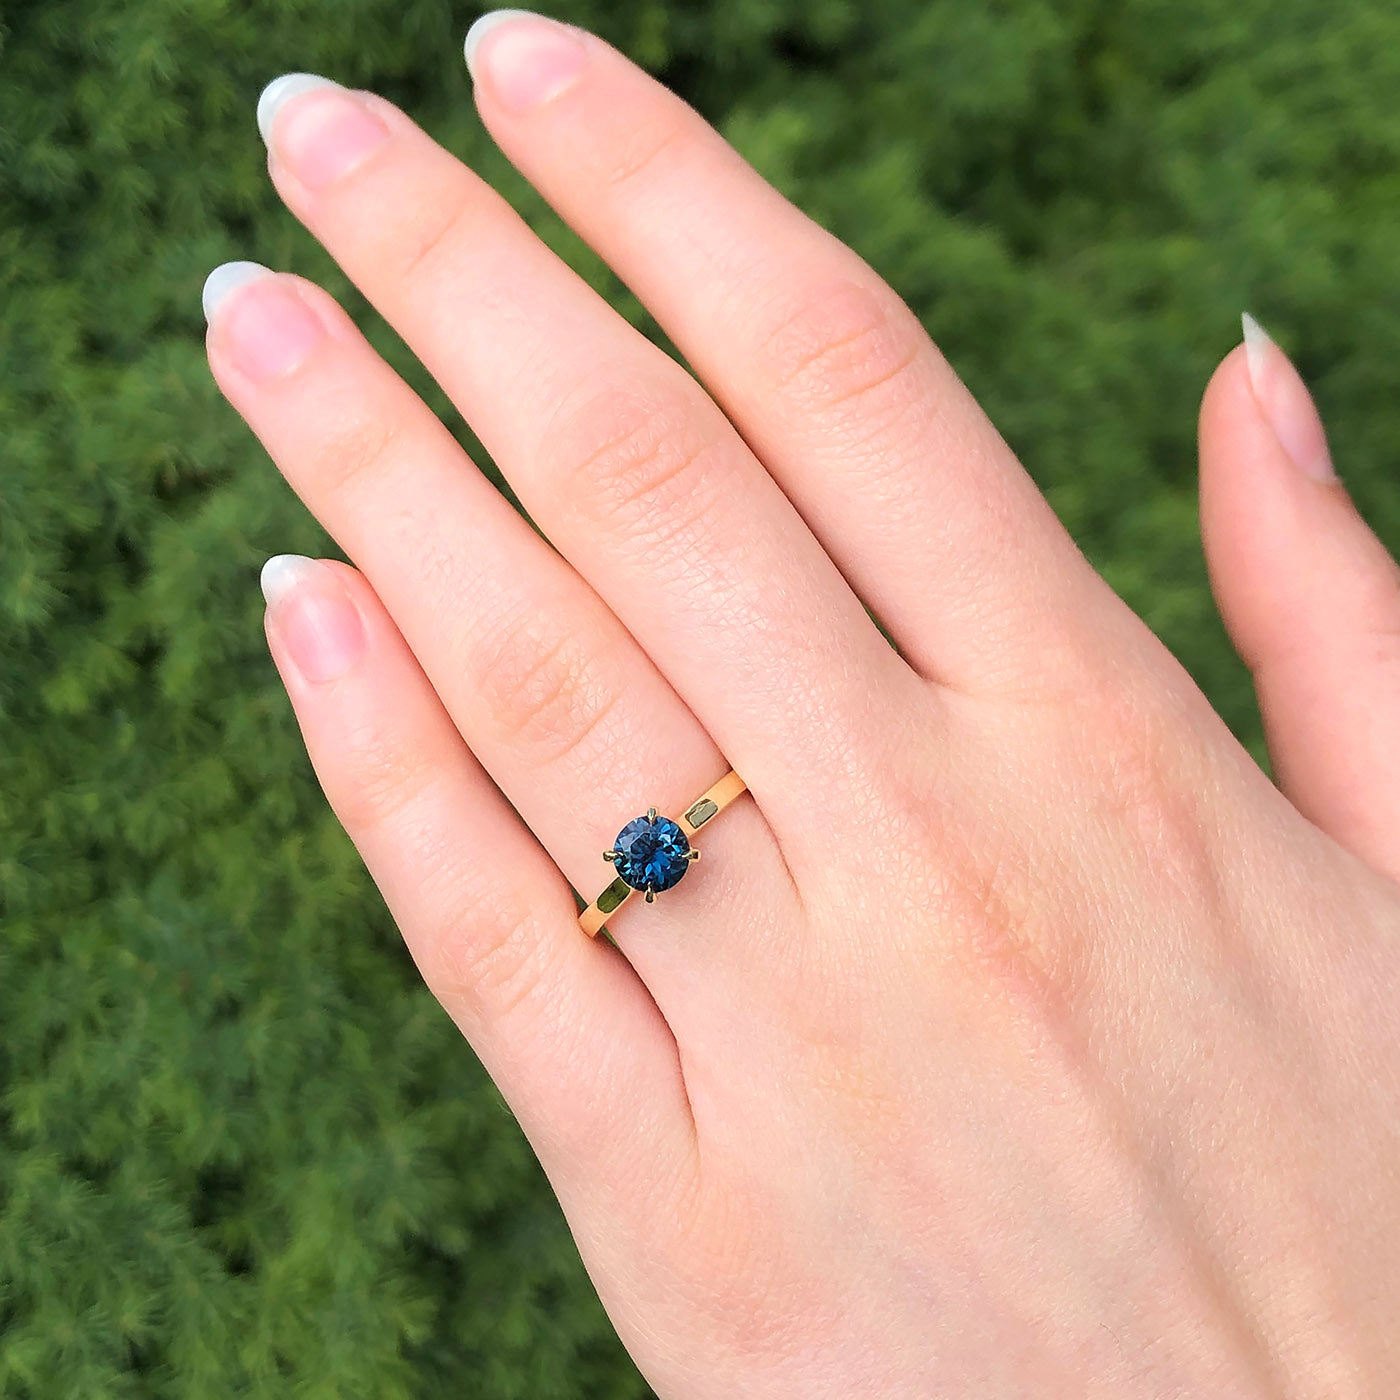 18ct Gold Parti Sapphire Claw Set Solitaire Engagement Ring